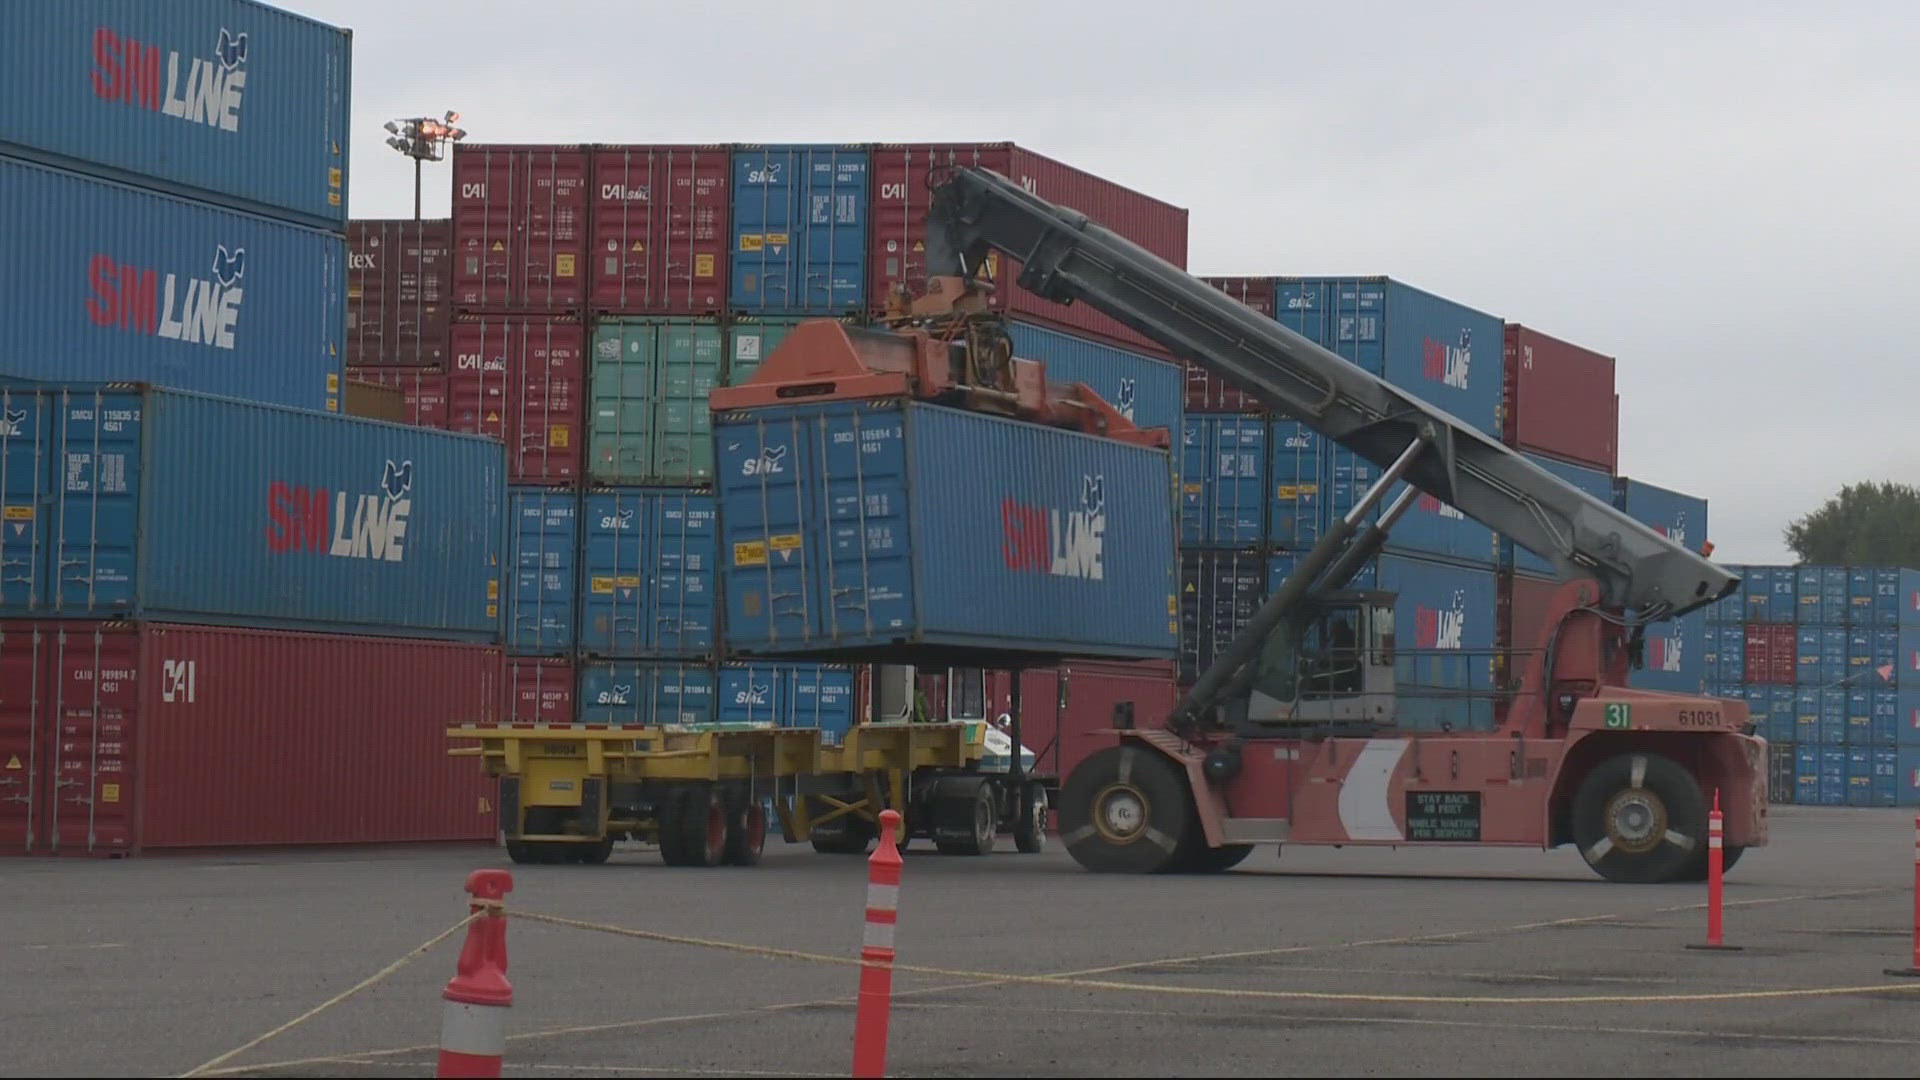 Kotek is proposing $40 million in state investments to keep the container port open at the Port of Portland's Terminal 6.